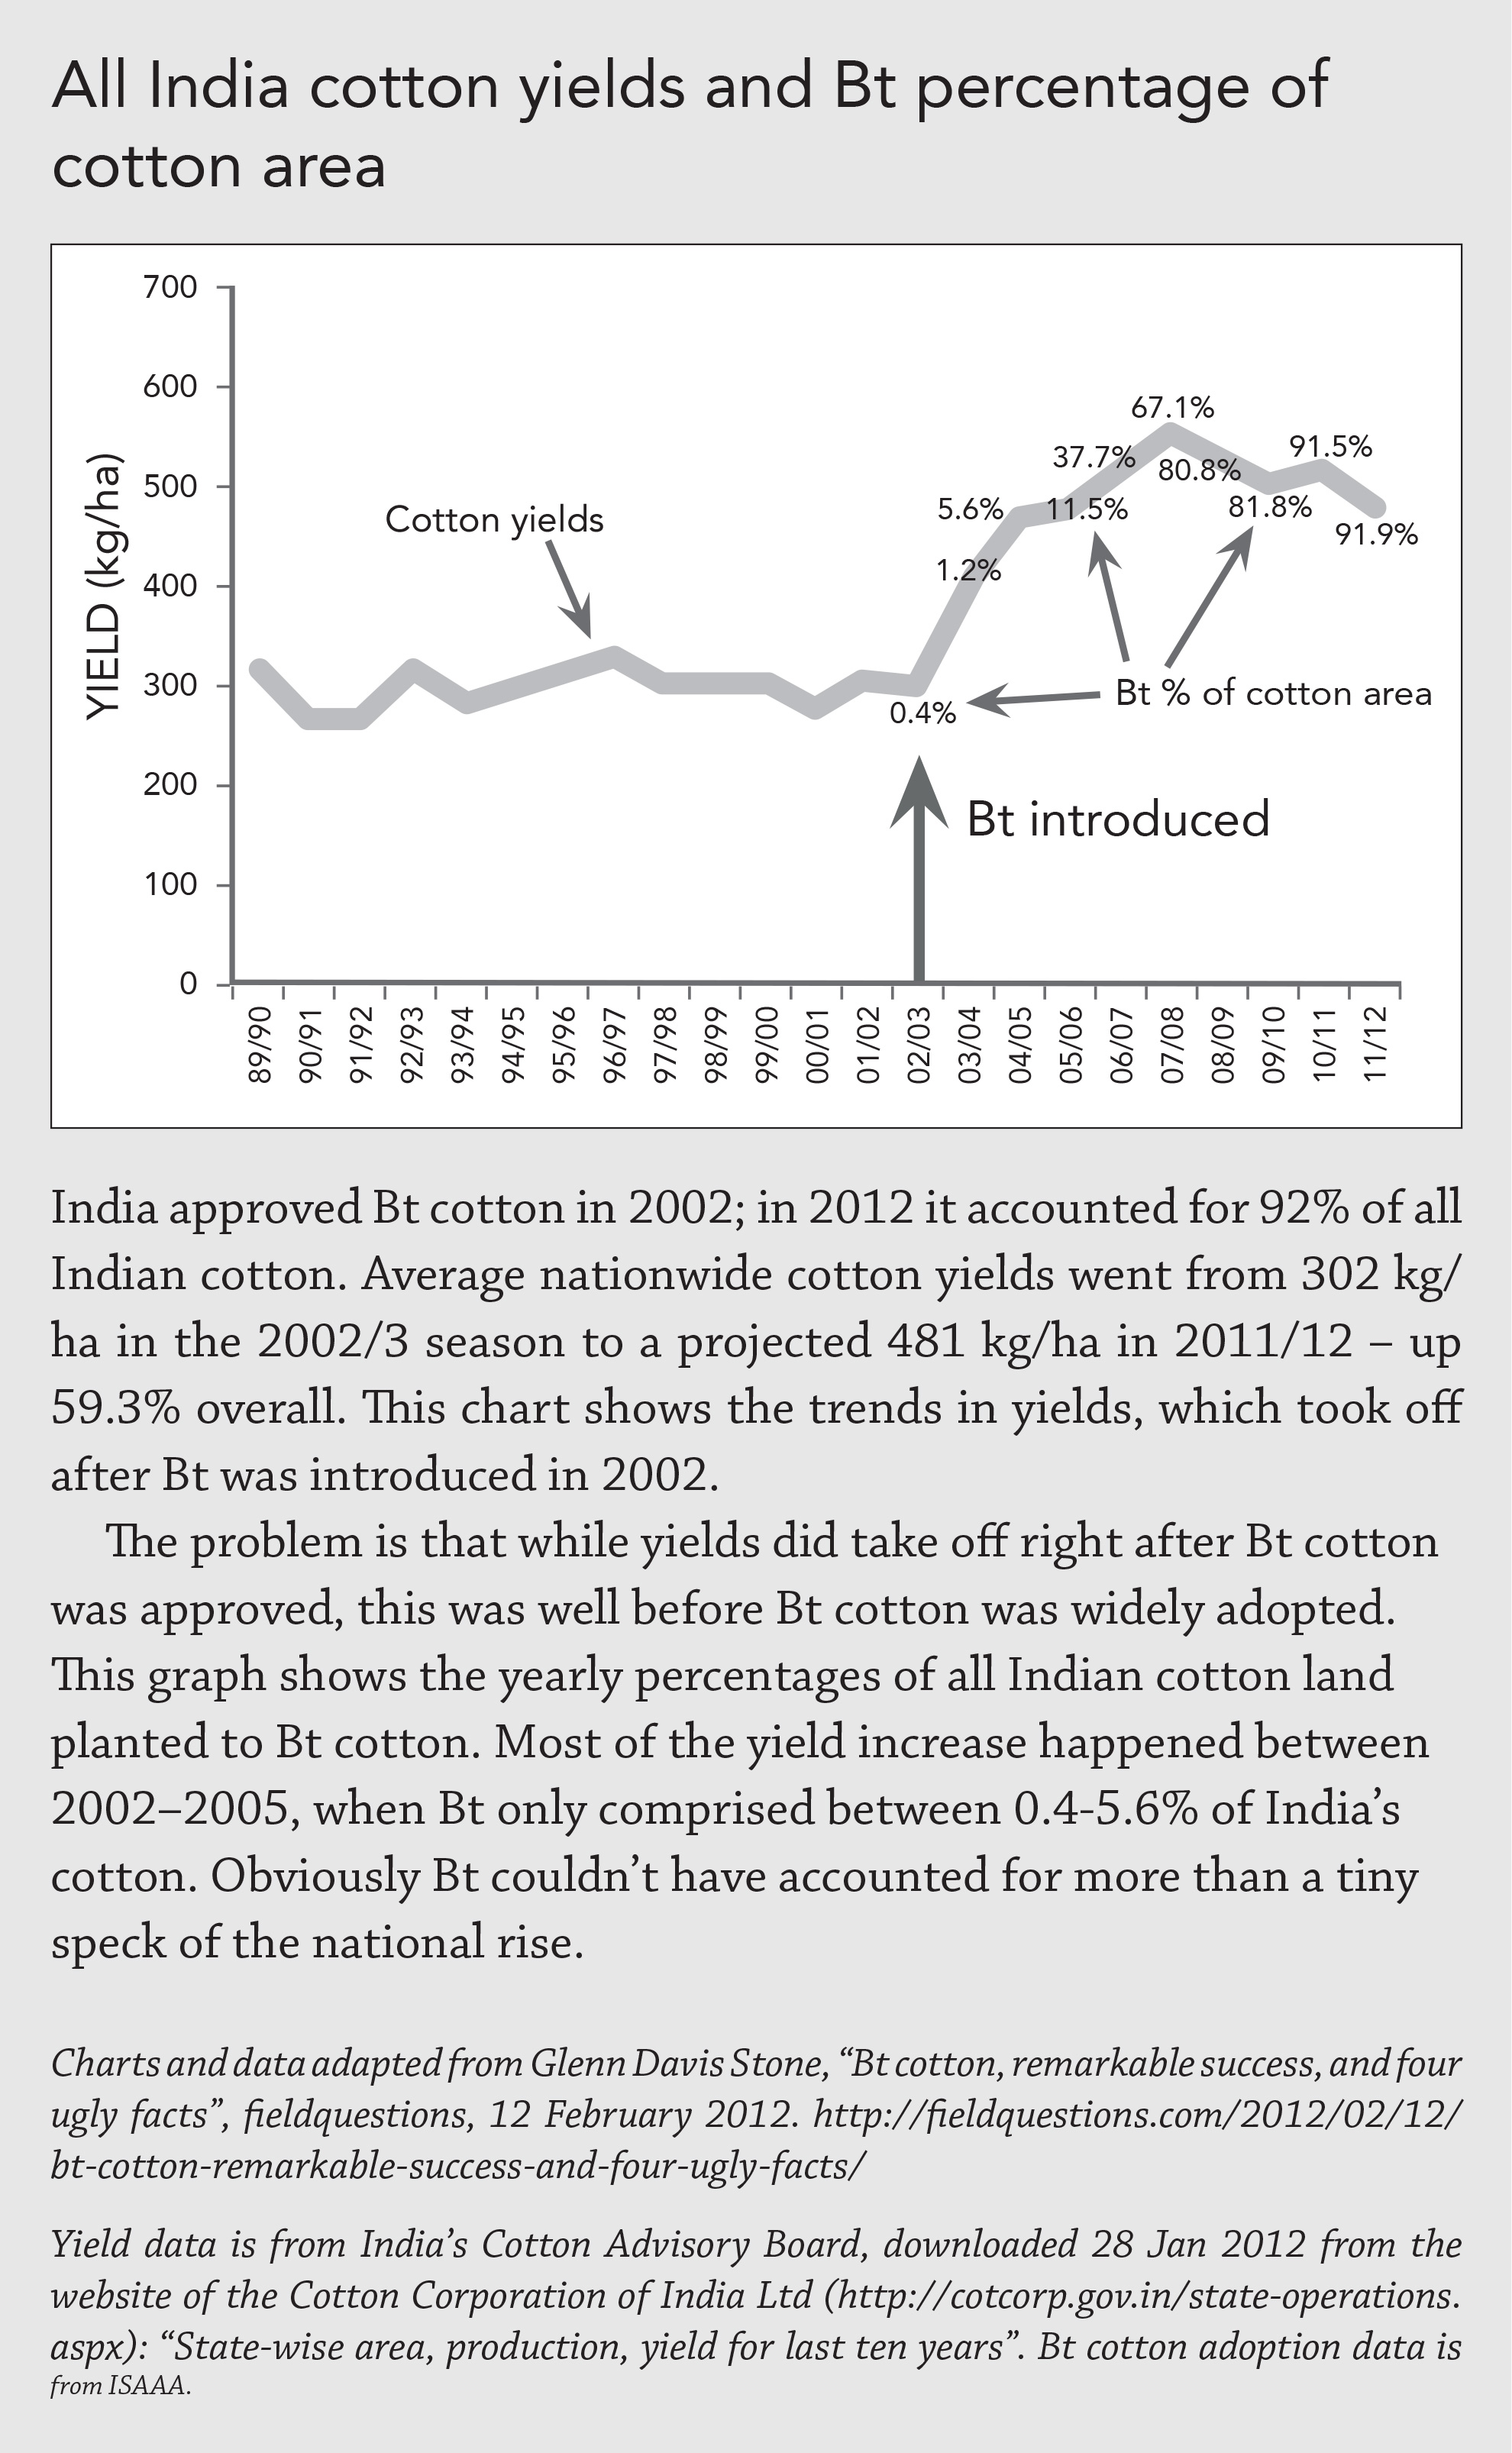 All India cotton yields and Bt percentage of cotton area (text and graph)